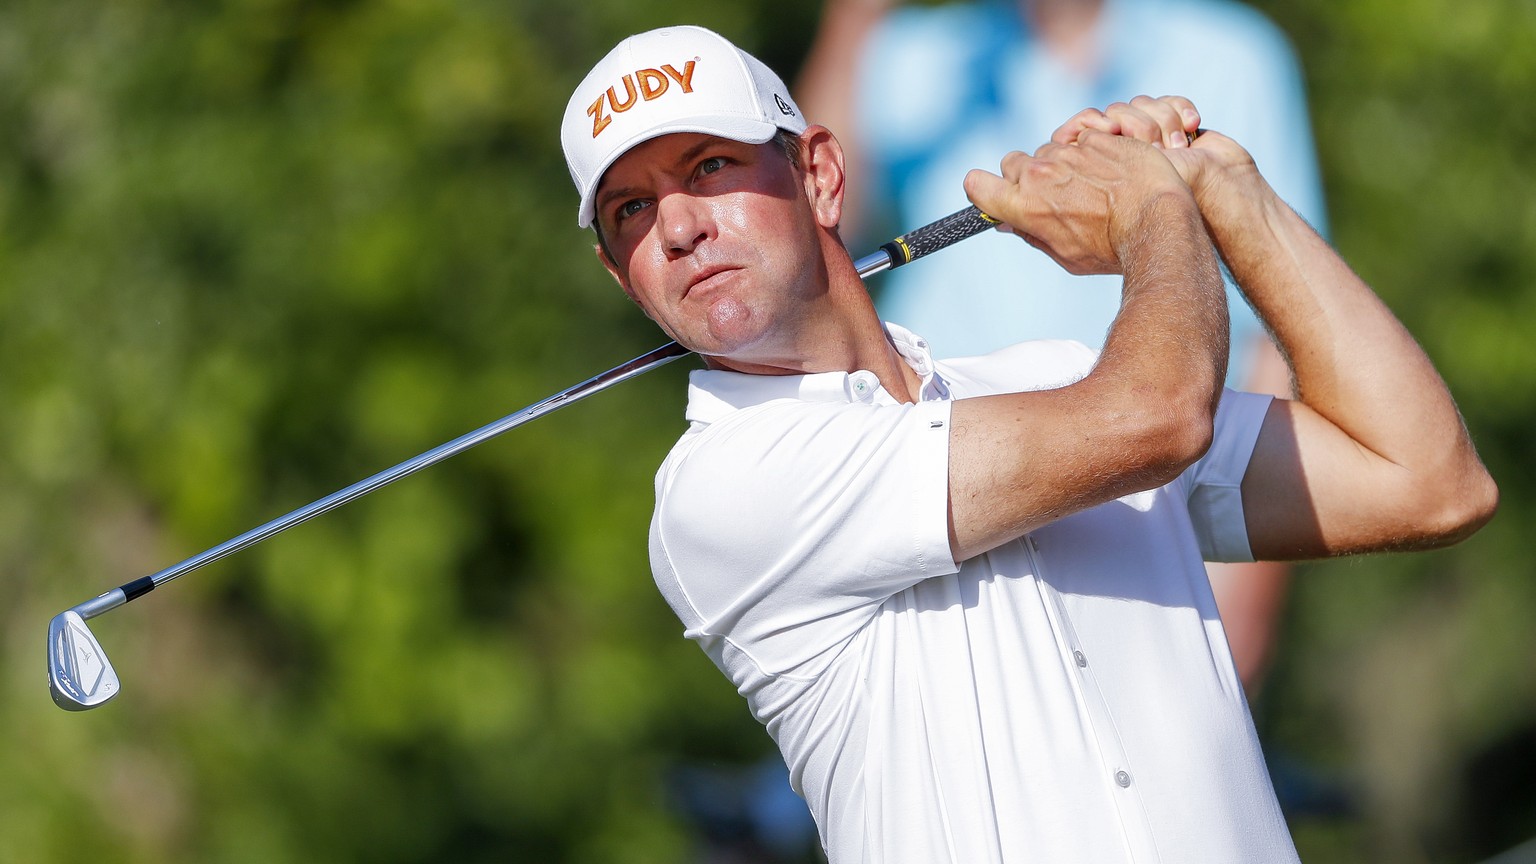 epa06725927 Lucas Glover of the US on the eighth tee during the first round of THE PLAYERS Championship golf tournament at the TPC Sawgrass Stadium Course in Ponte Vedra Beach, Florida, USA, 10 May 20 ...